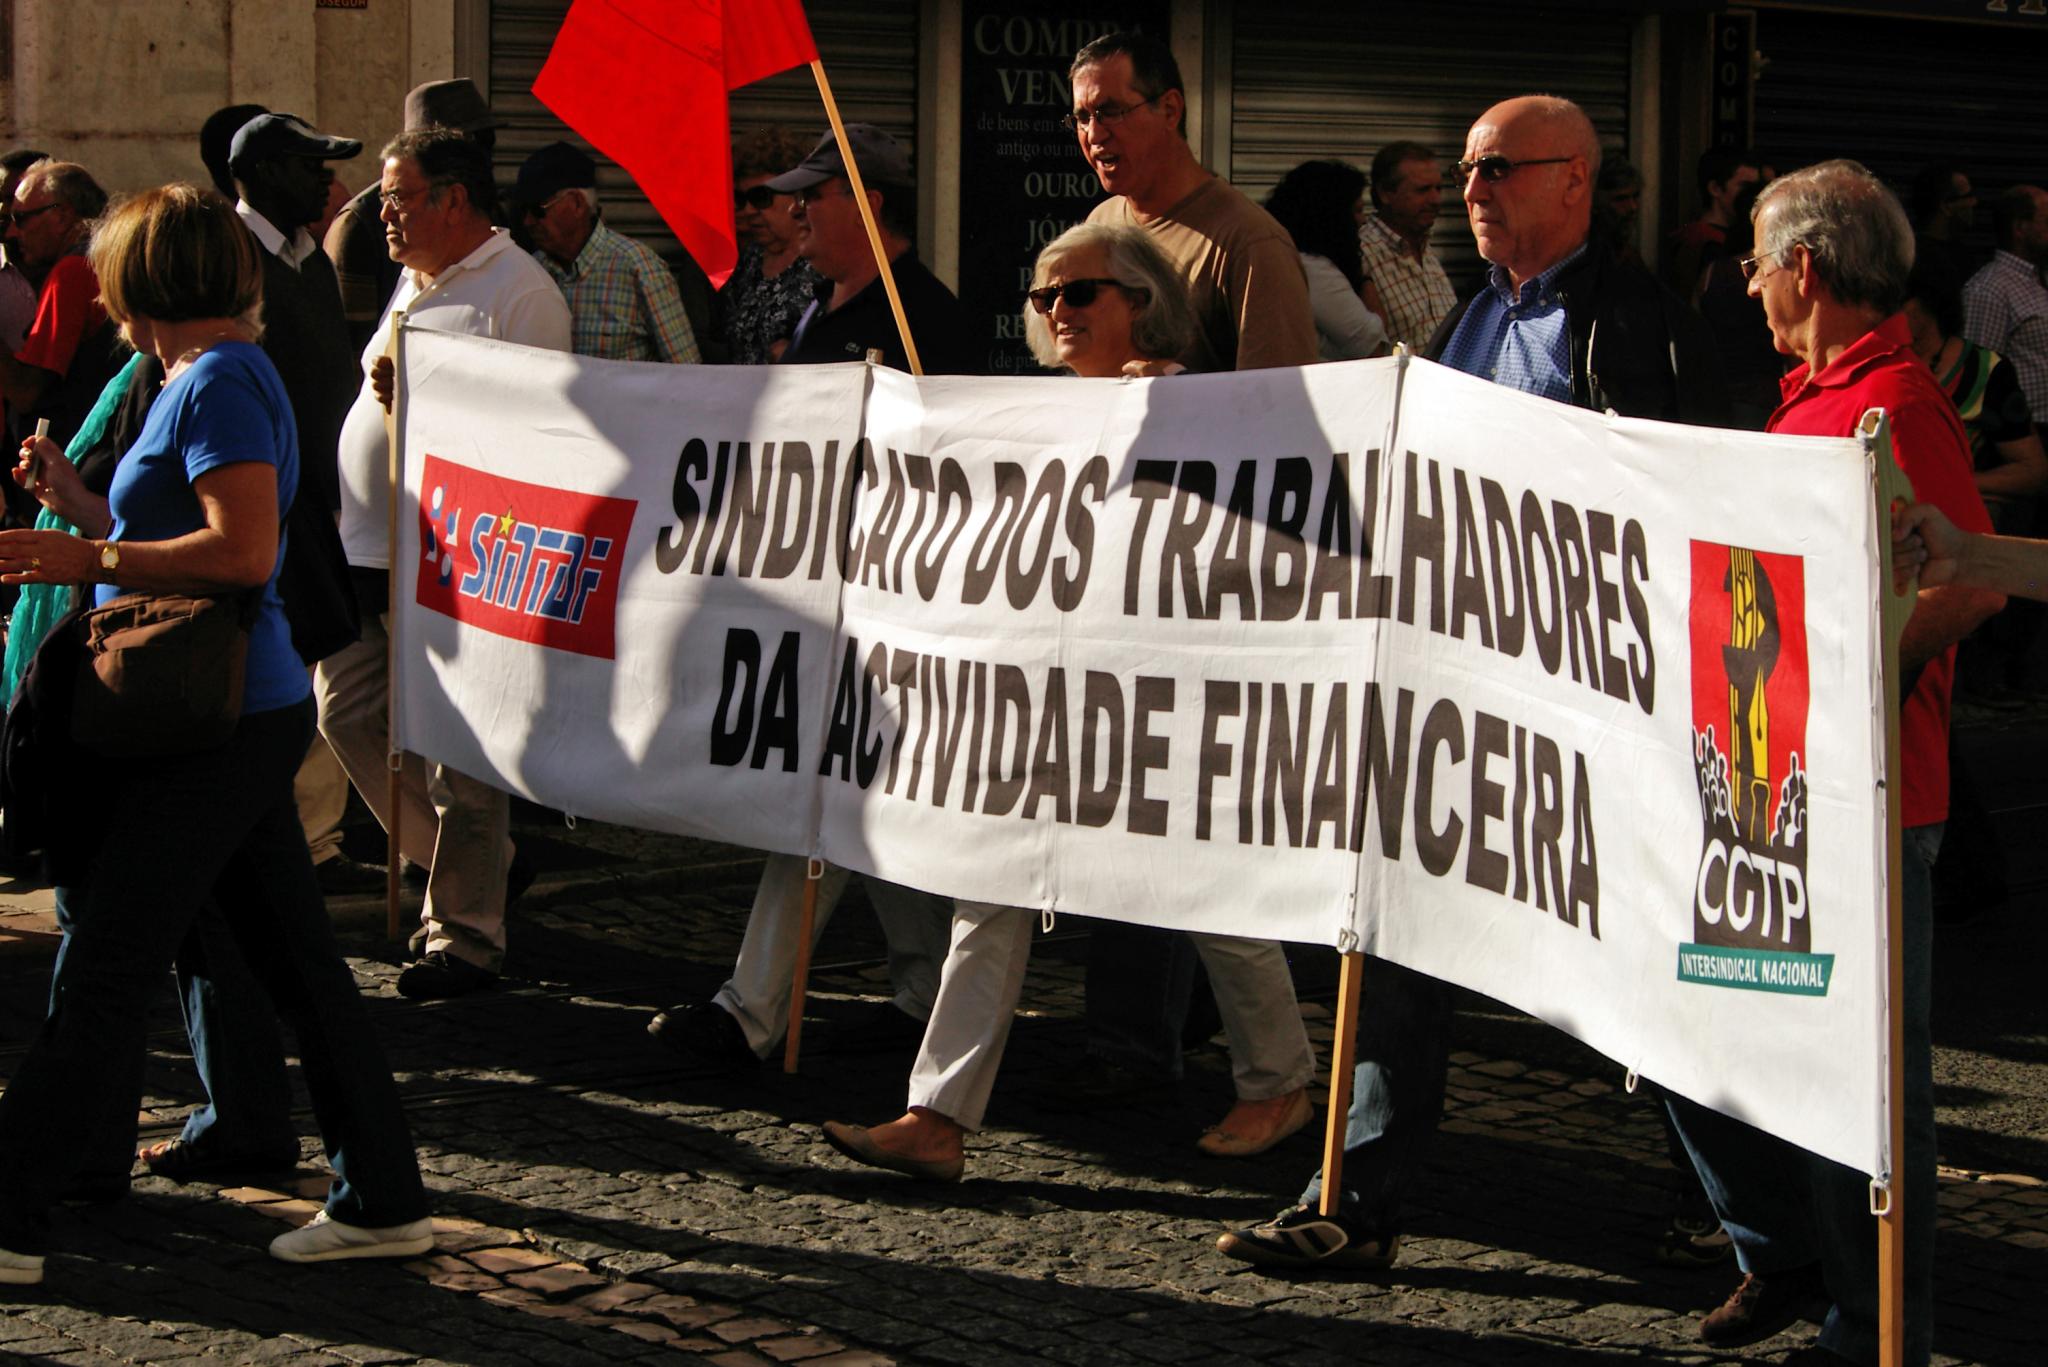 group of people holding a banner in a street